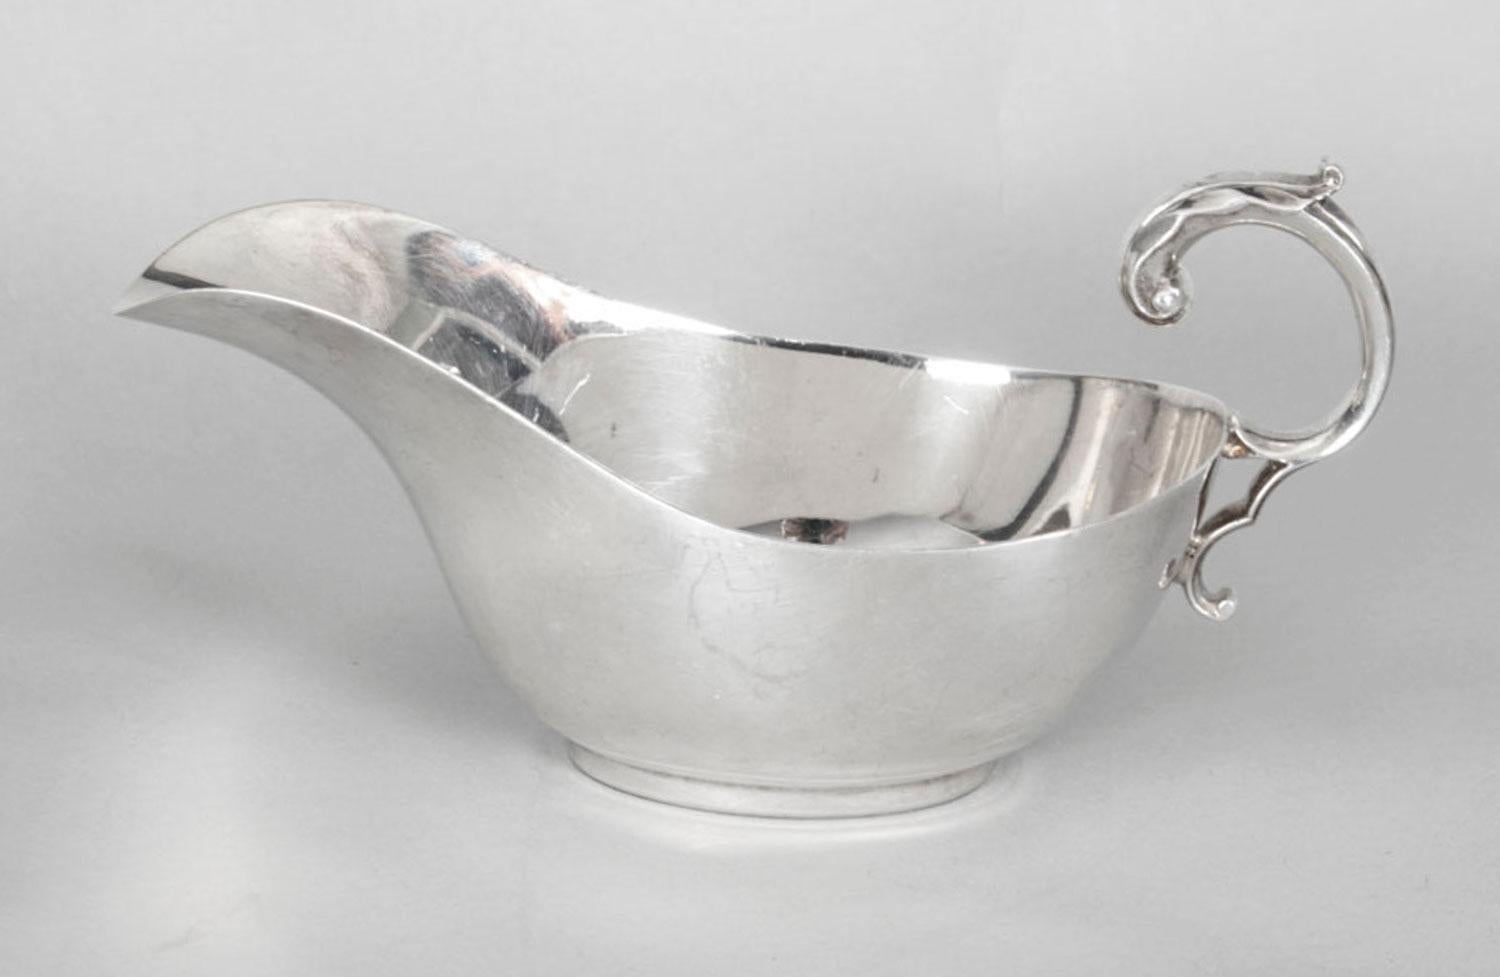 English Antique Art Deco Silver Plated Apparatus Serving Set, 1920s